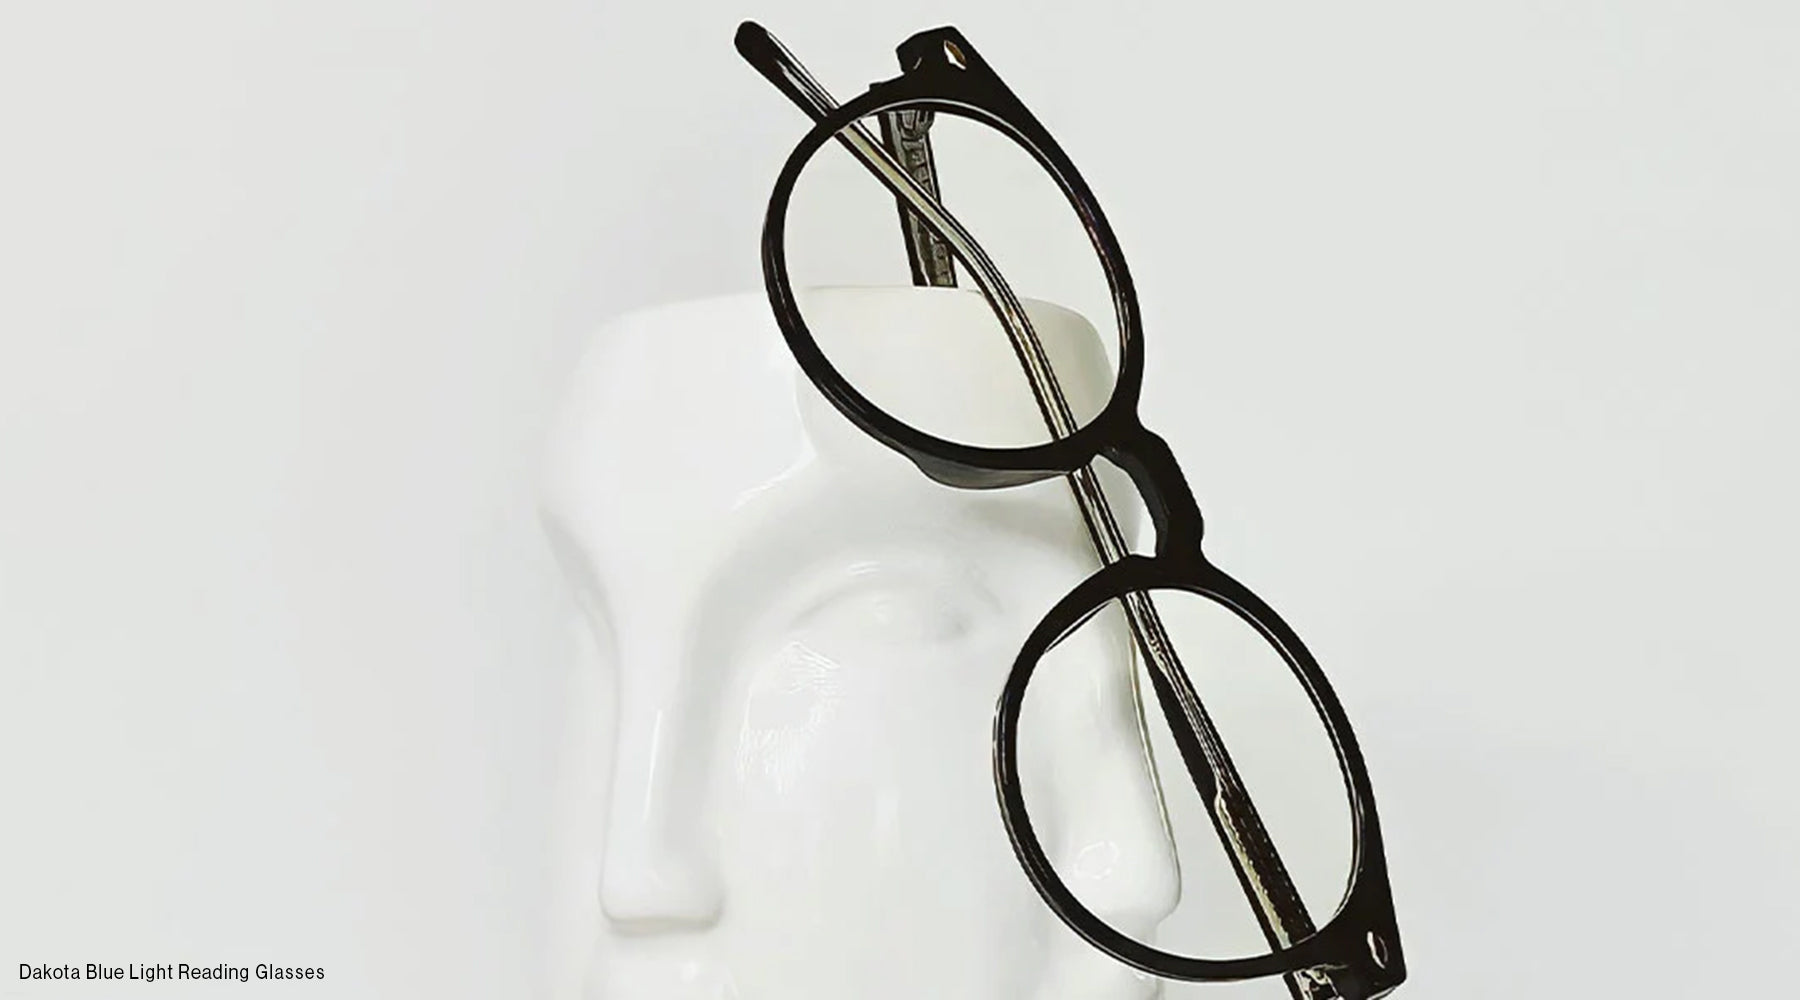 Are Computer Reading Glasses Right For You? How to Find Your Lens Strength